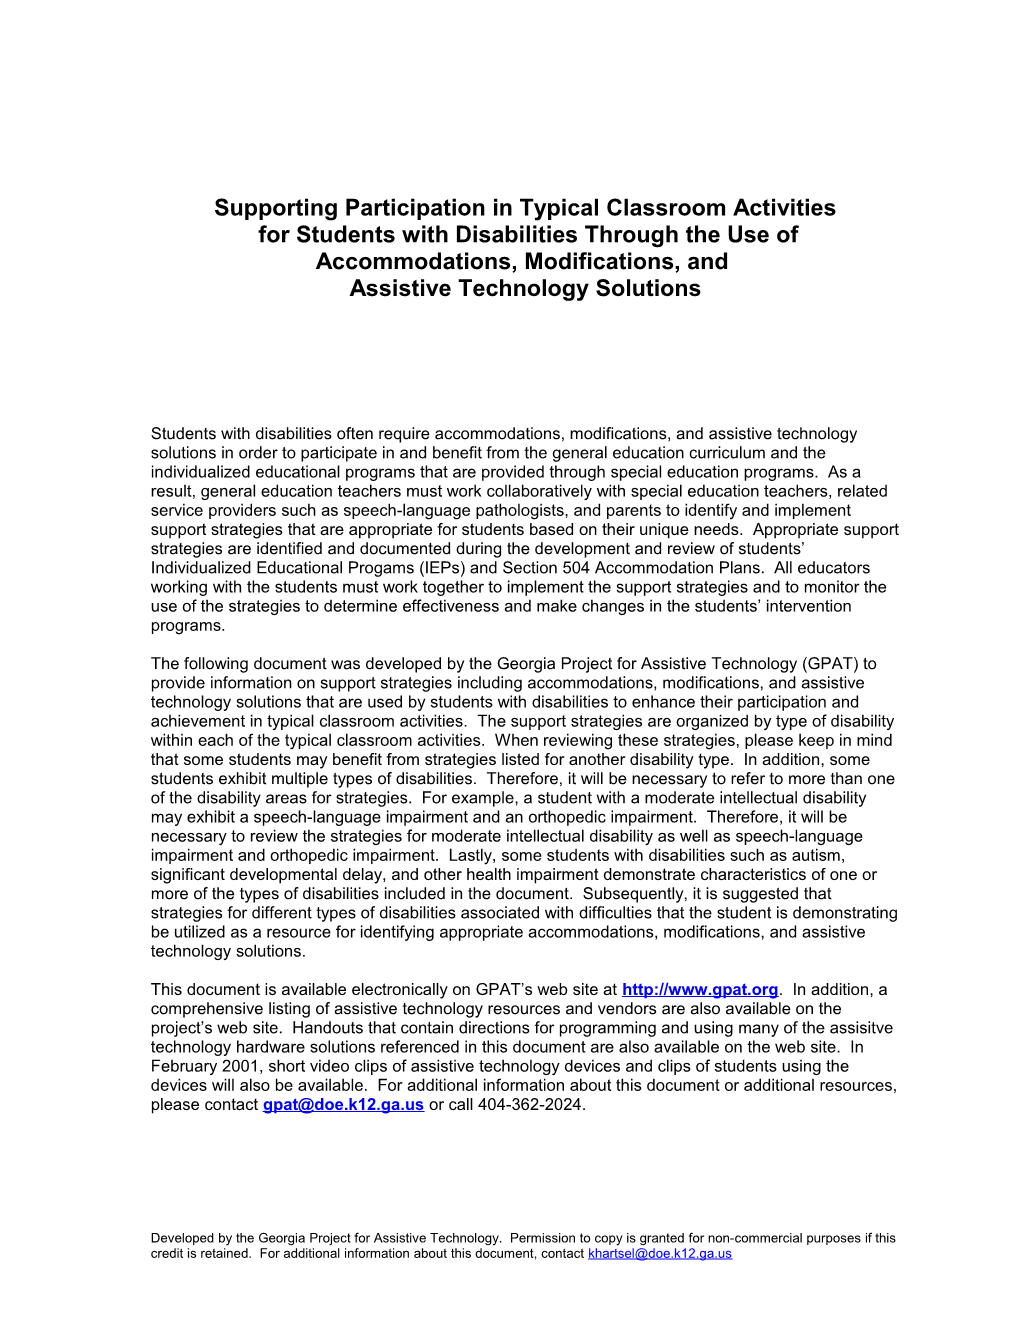 Supporting Participation in Typical Classroom Activities MS Word Document